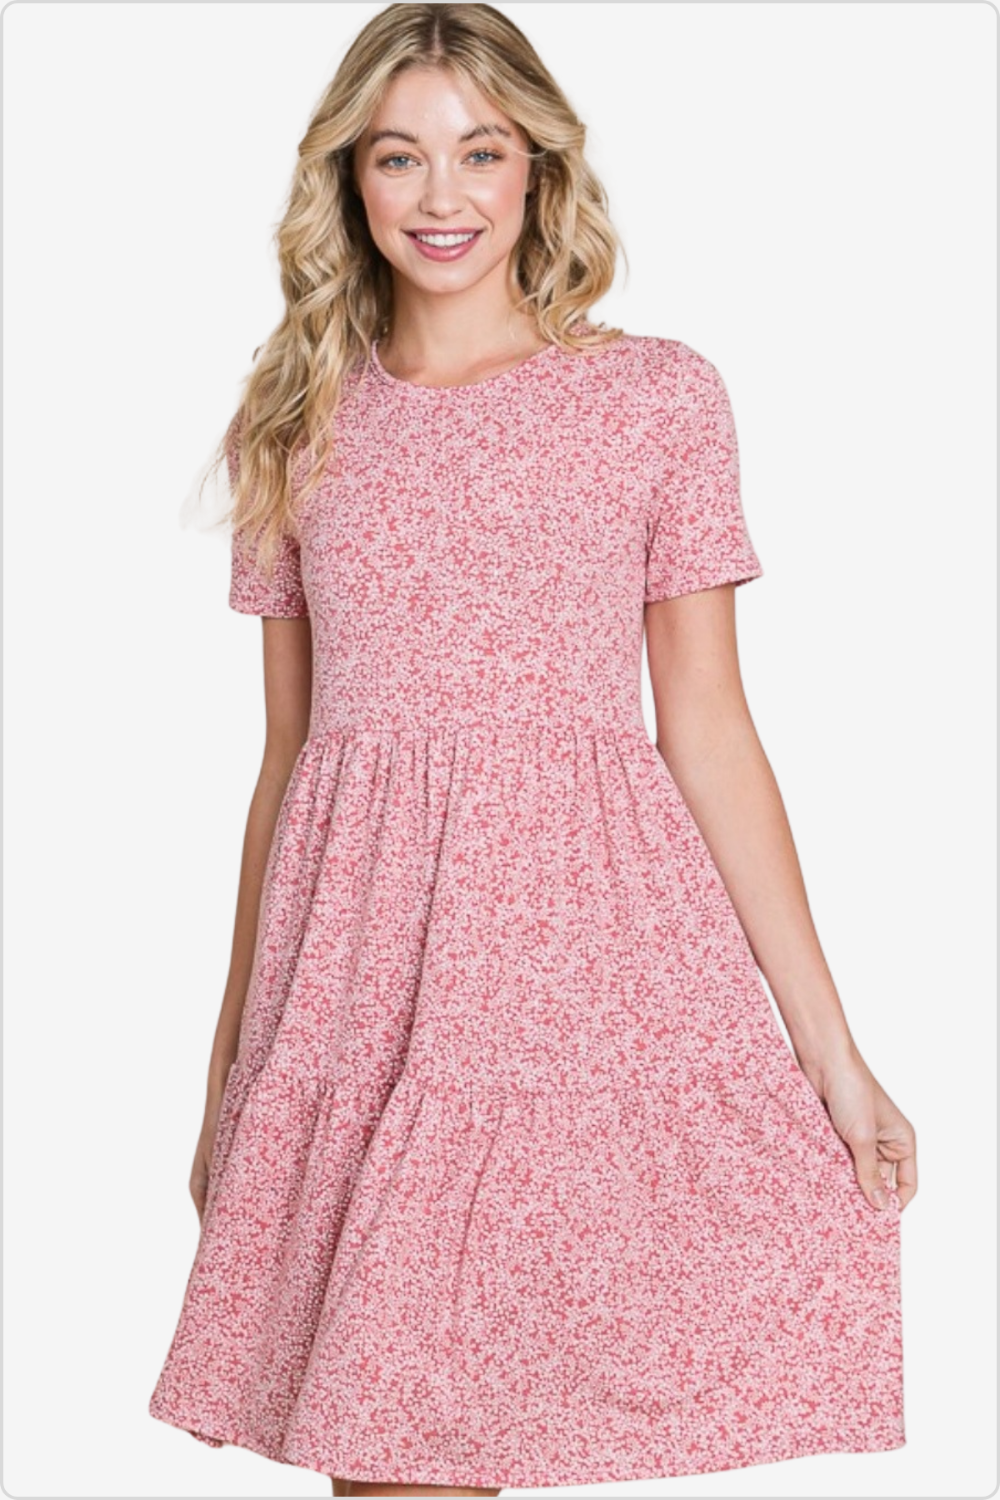 Joyful woman in a delicate pink floral print skater dress with a round neck and short sleeves, epitomizing soft summer elegance.